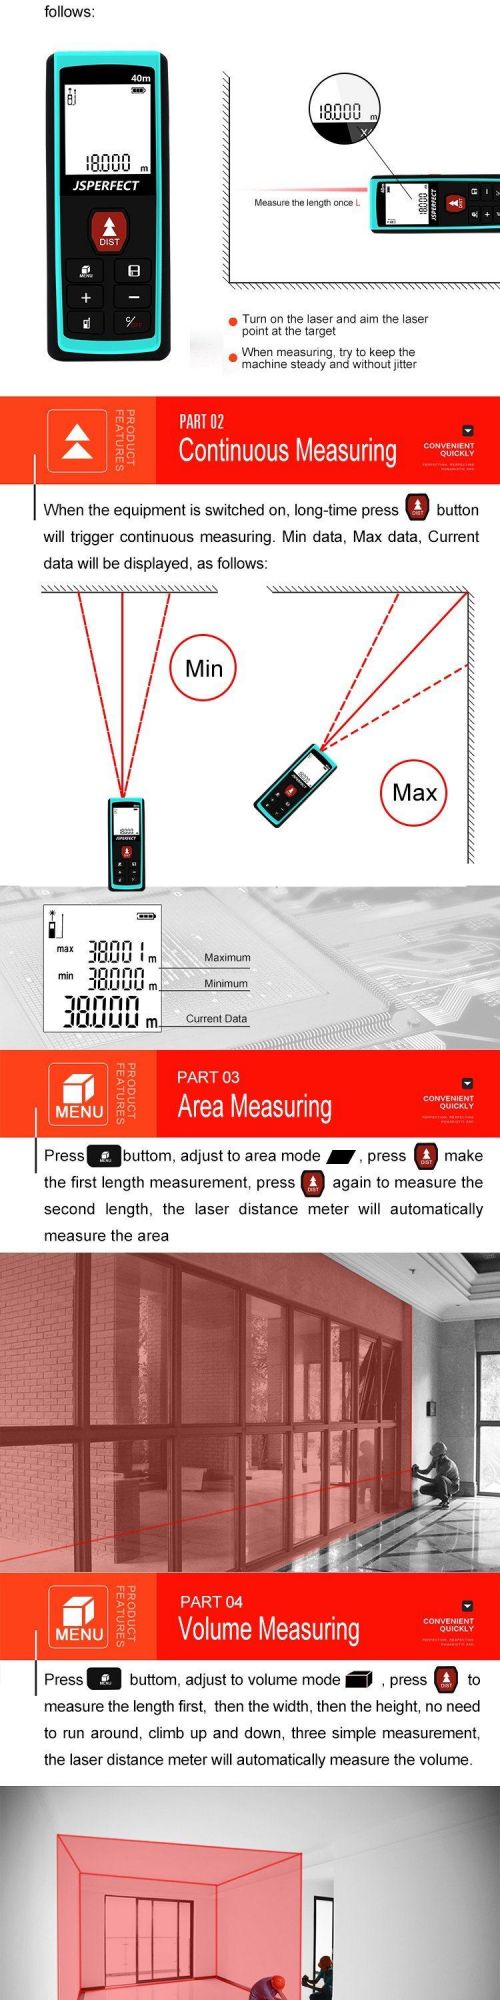 40m Instrument Laser Distance Meter Supplier From China